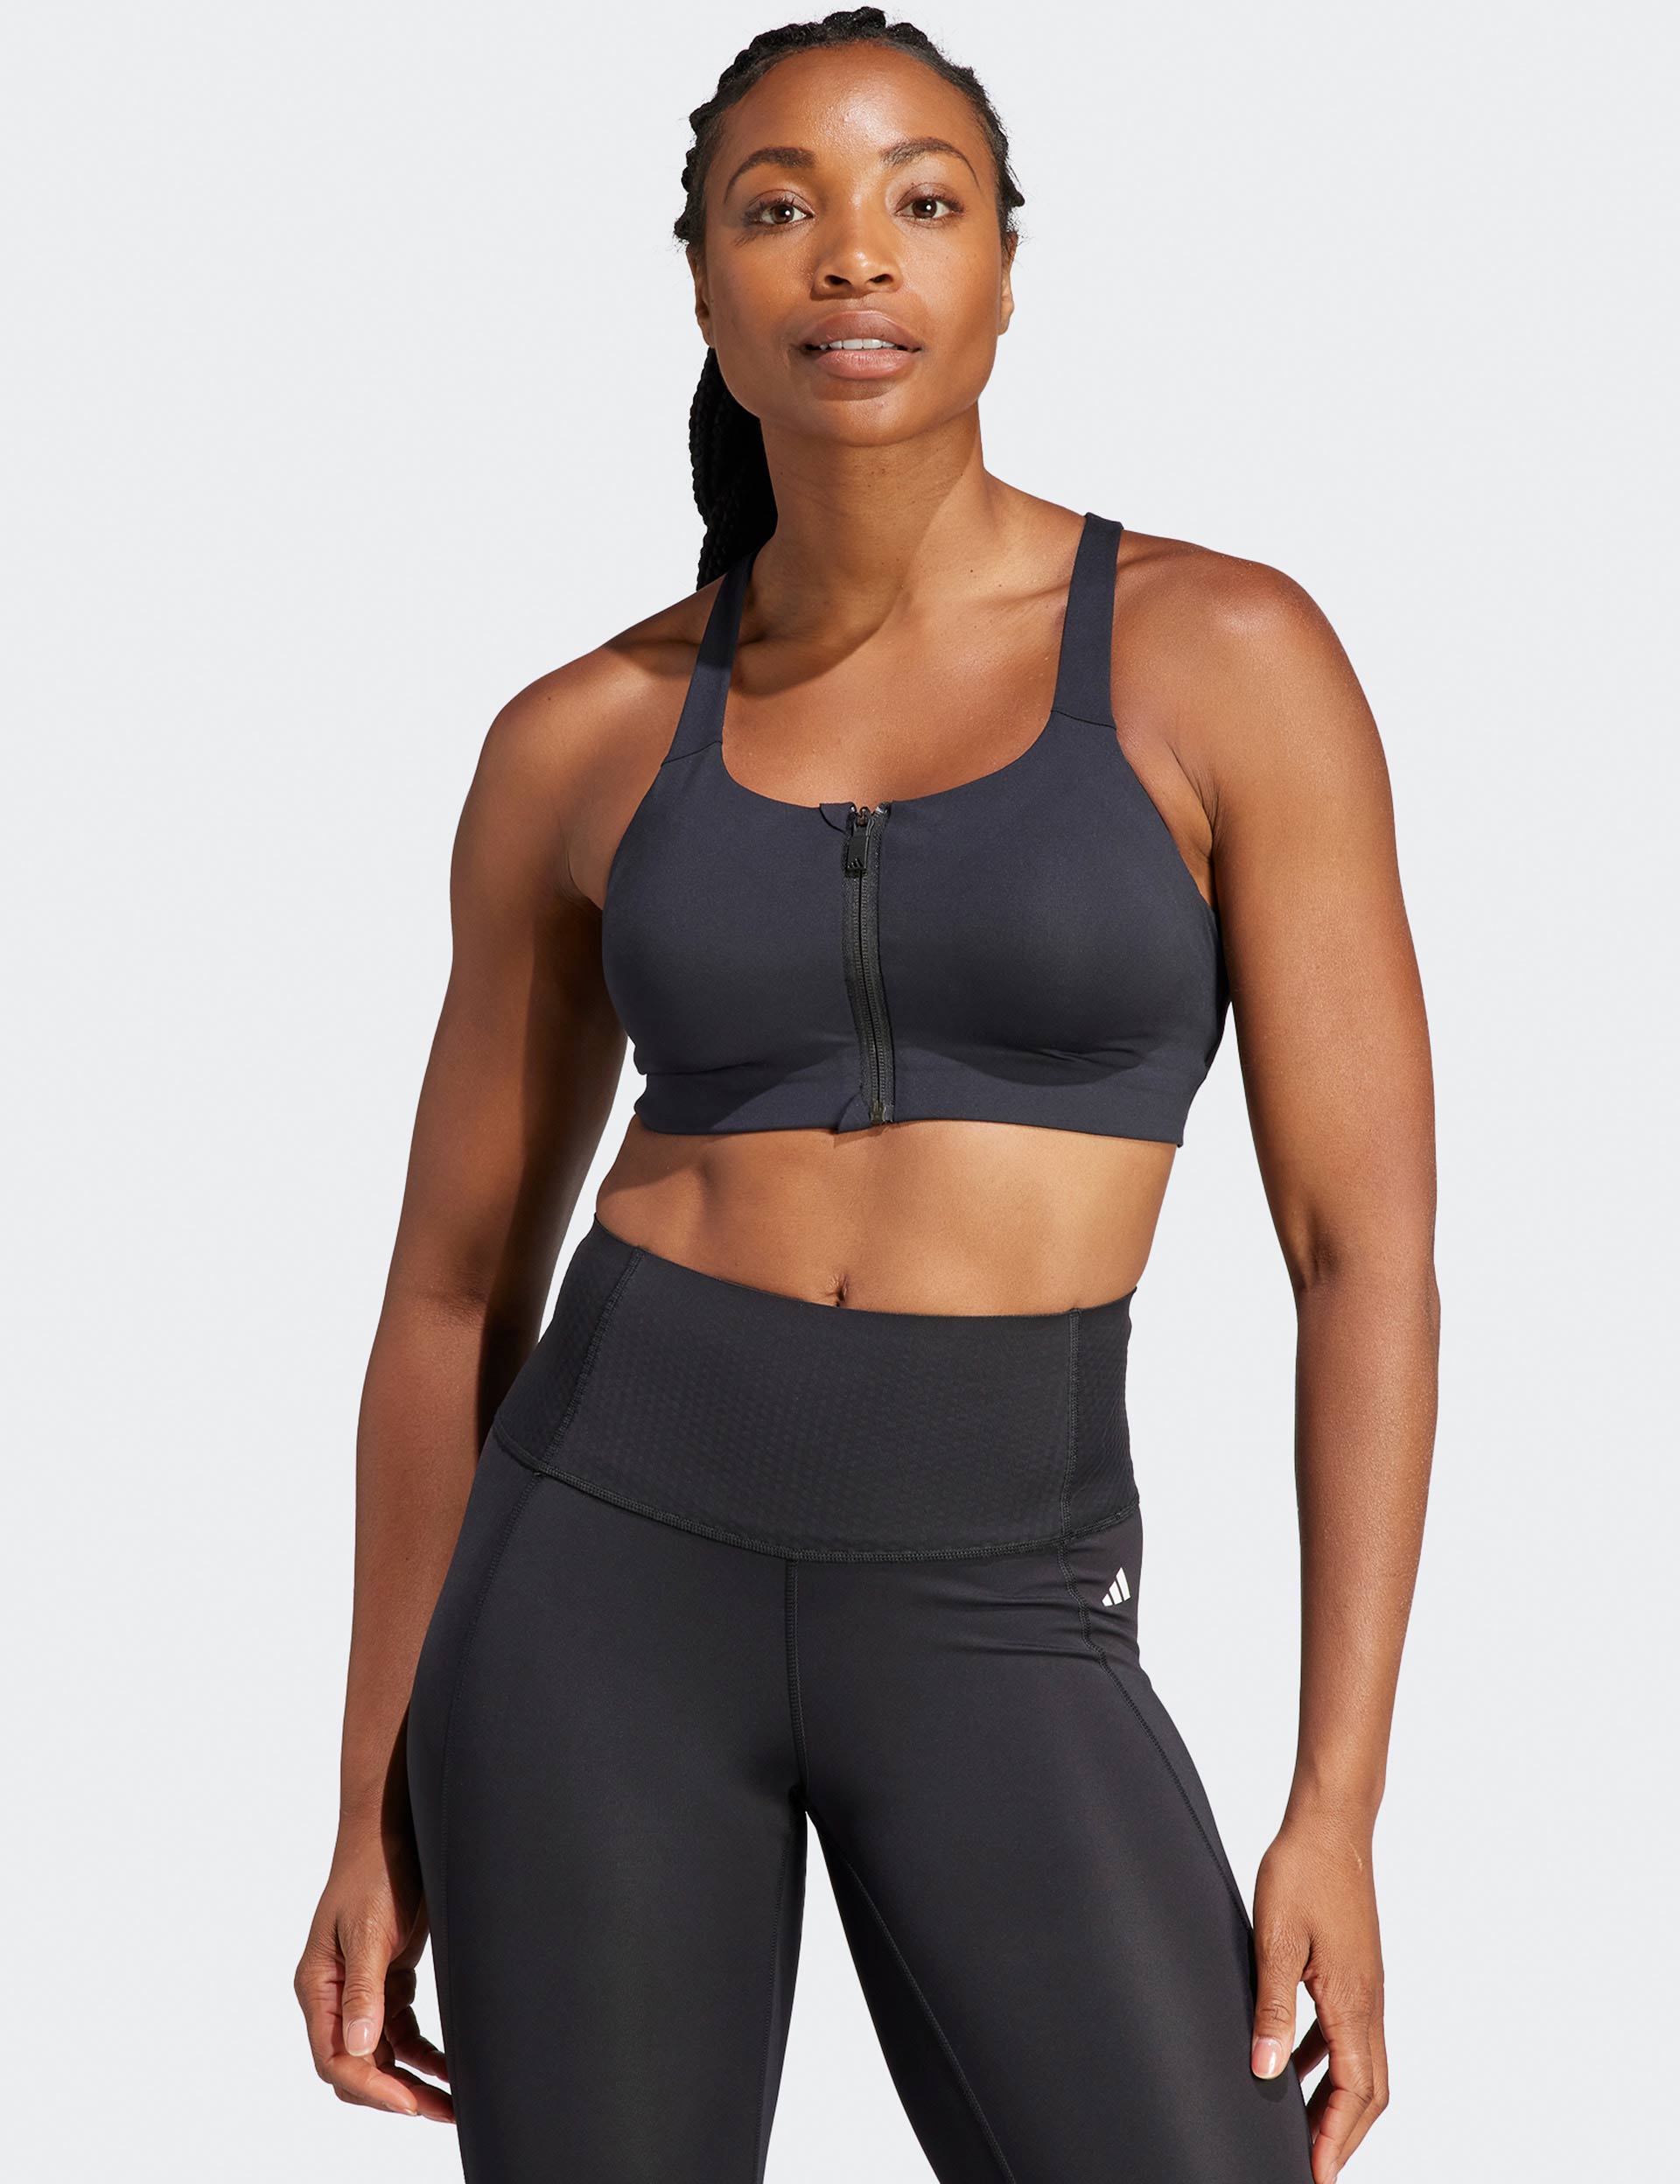 Women's yoga bra made of recycled materials